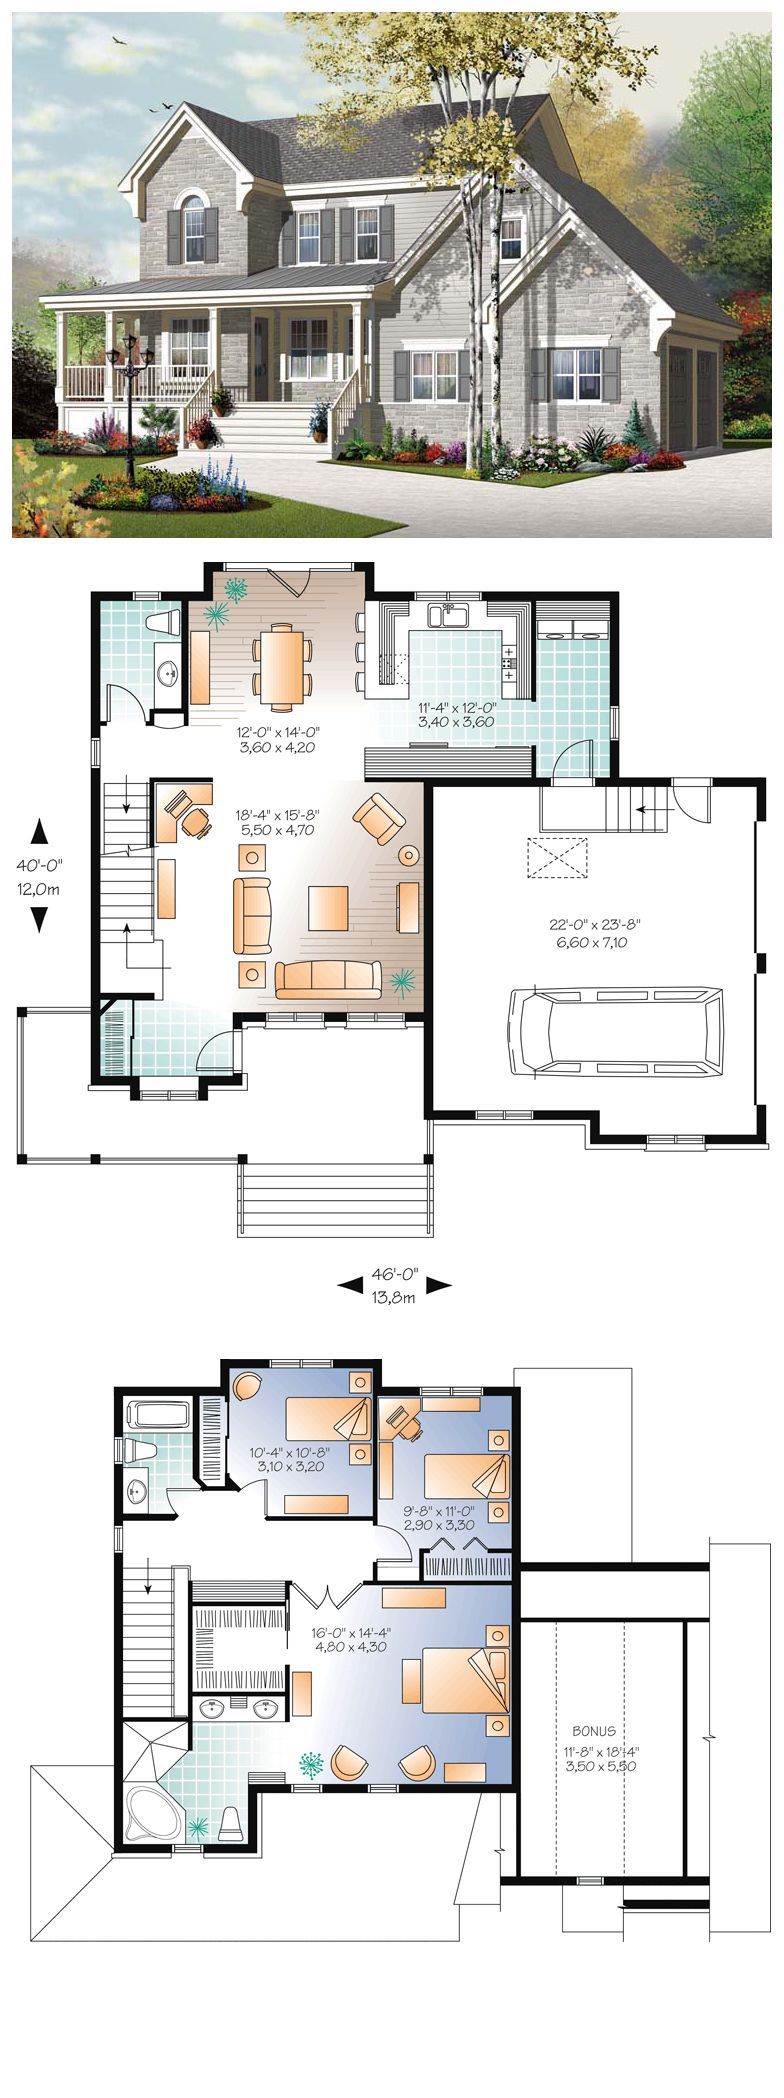 European House Plan 76322 | Total living area: 1854 sq ft, 3 bedrooms & 2.5 bathrooms. Inspired by homes dotting the east coast, this handsome home is destined to be a favorite nation-wide. A